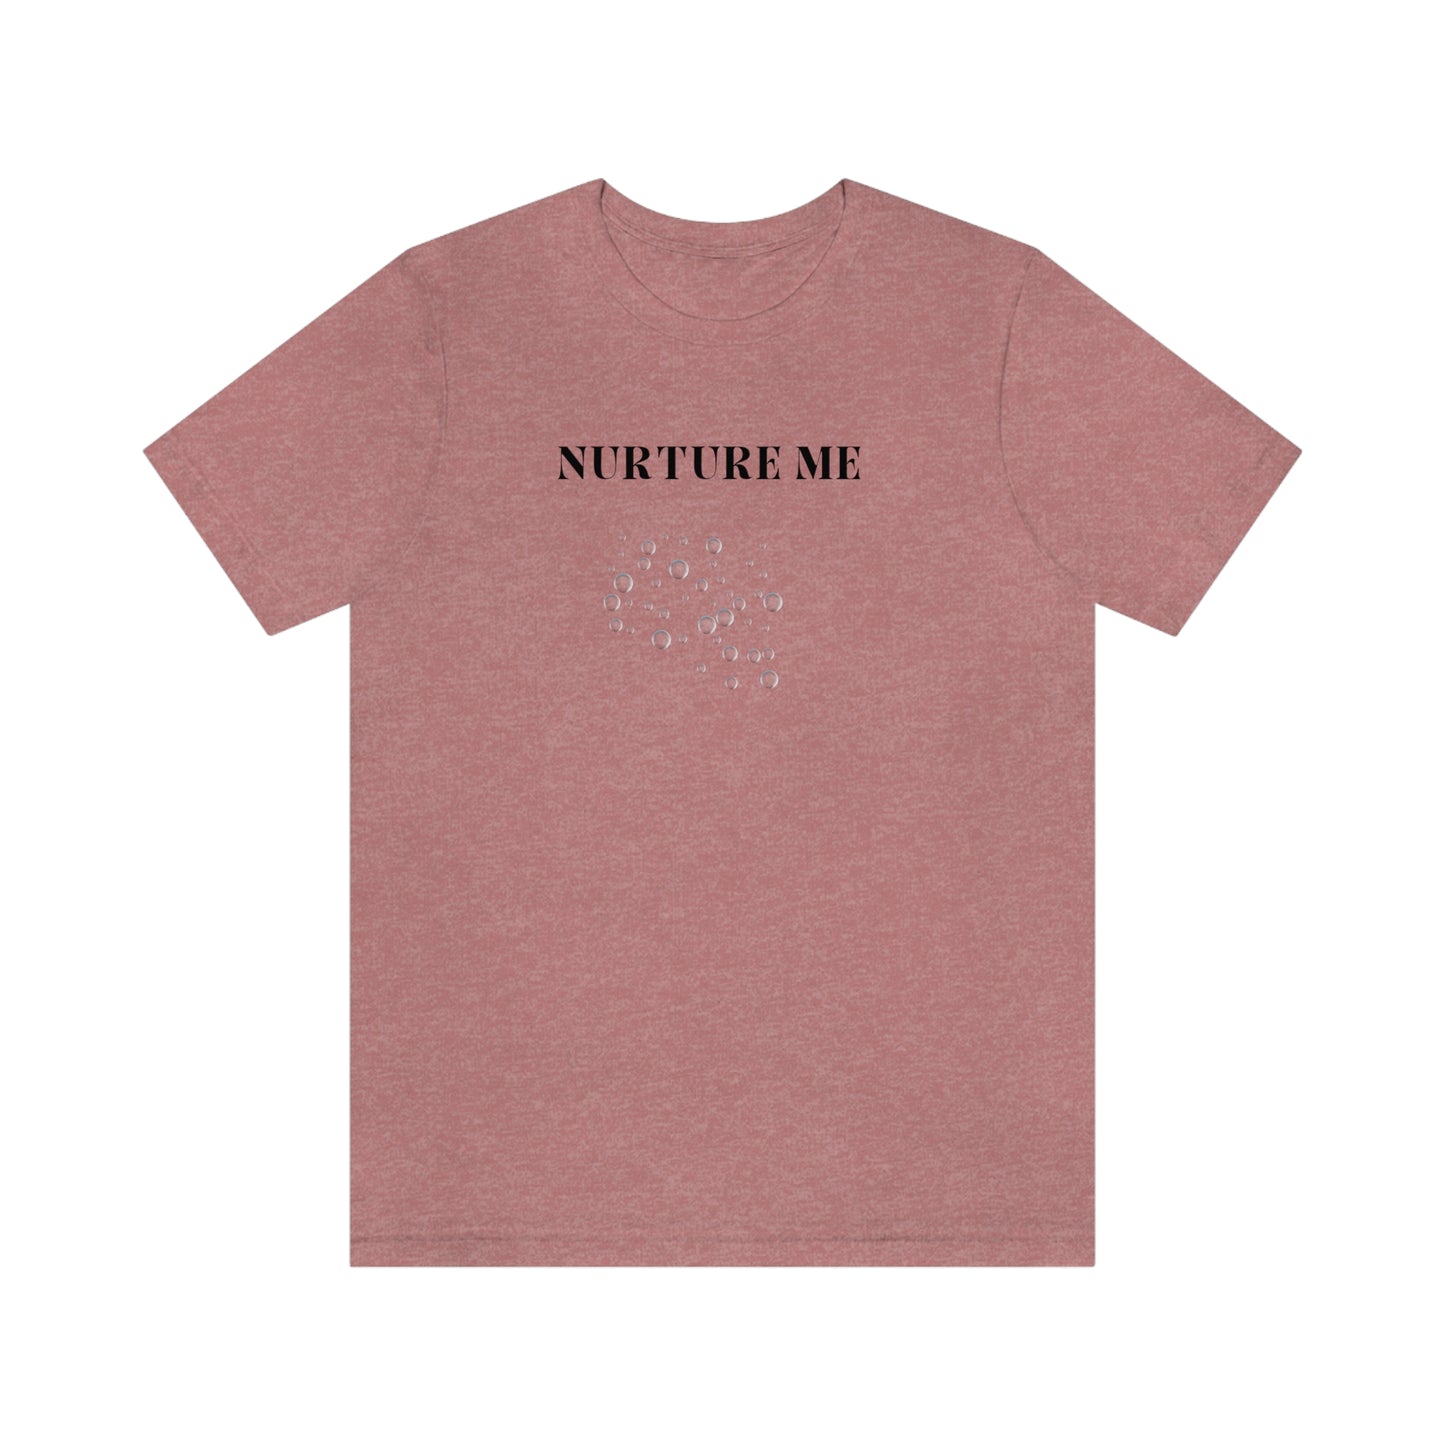 Nurture me t shirt t shirt with inspirational quotes t shirt gifts for friends